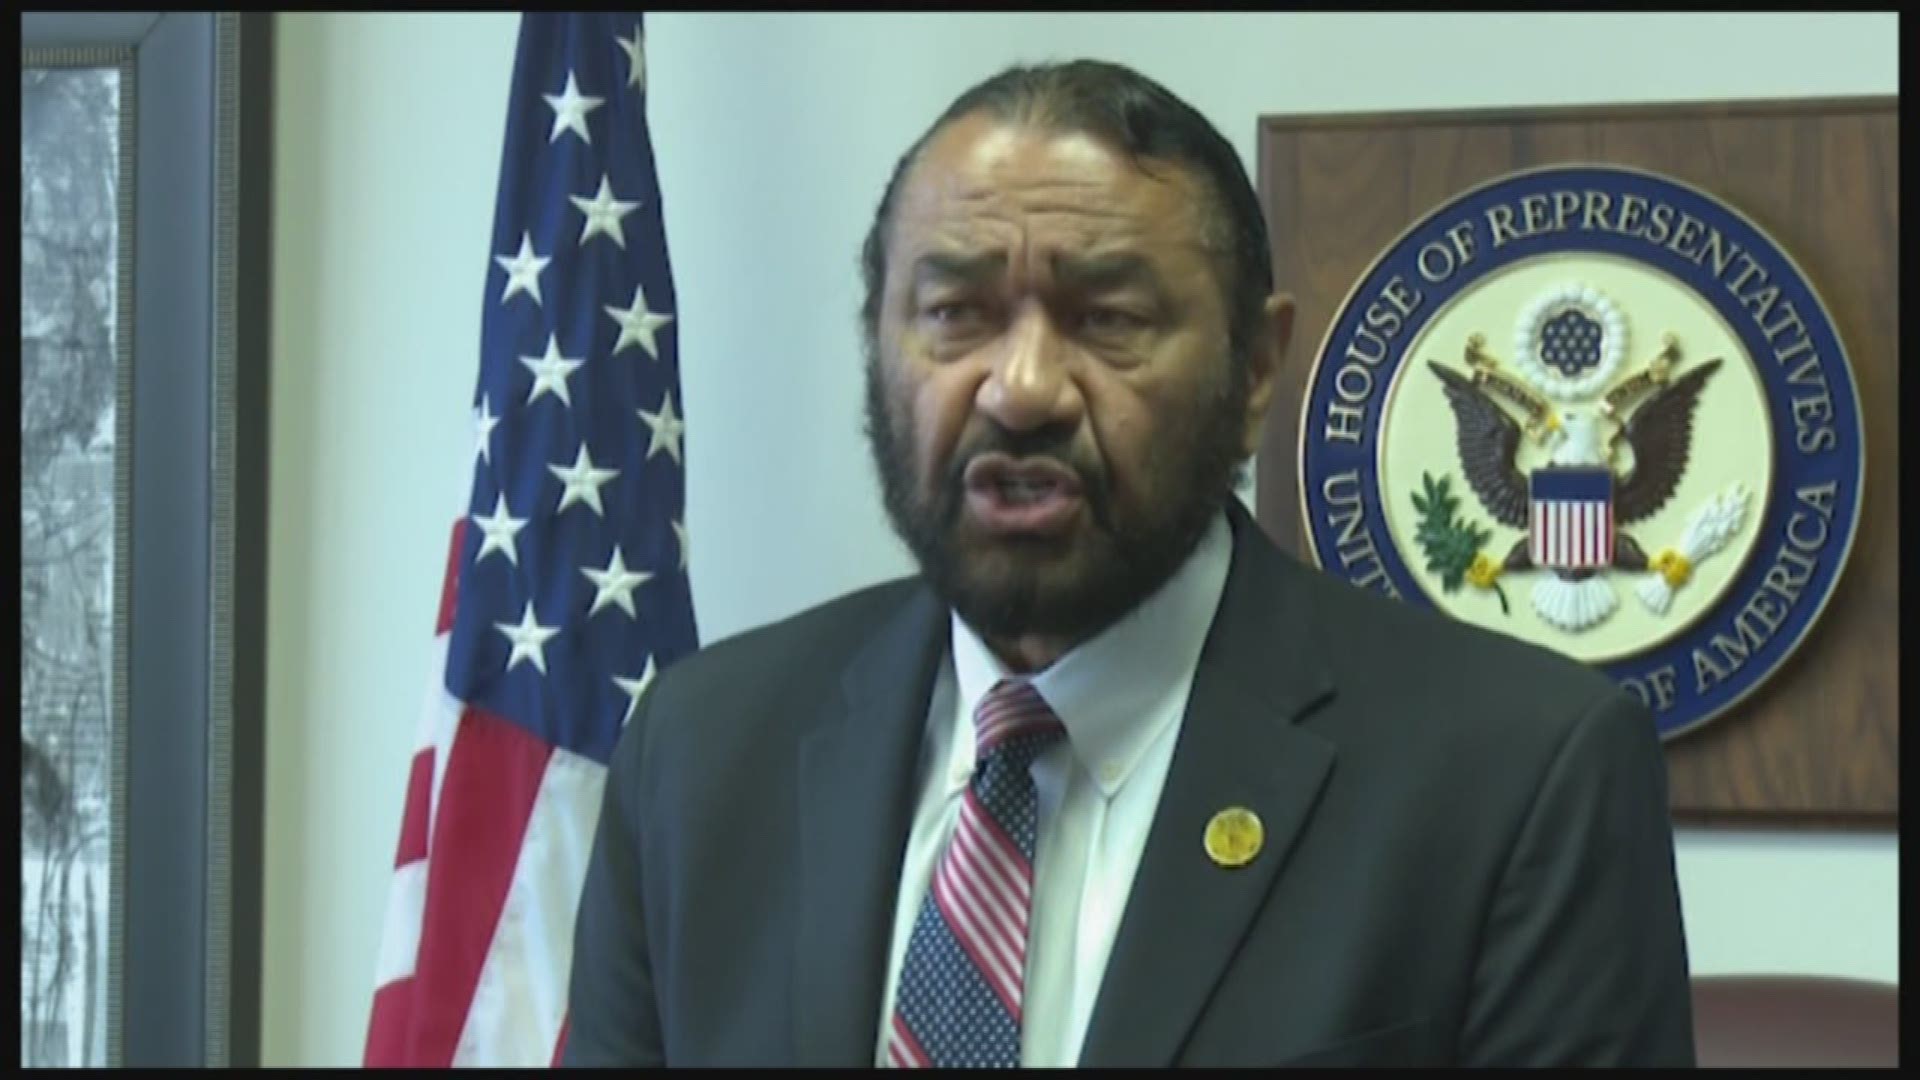 Houston Congressman Al Green is calling for the impeachment of President Donald Trump, accusing him of obstruction and intimidation. Some members of Congress agree with Green while others accuse him of grandstanding.